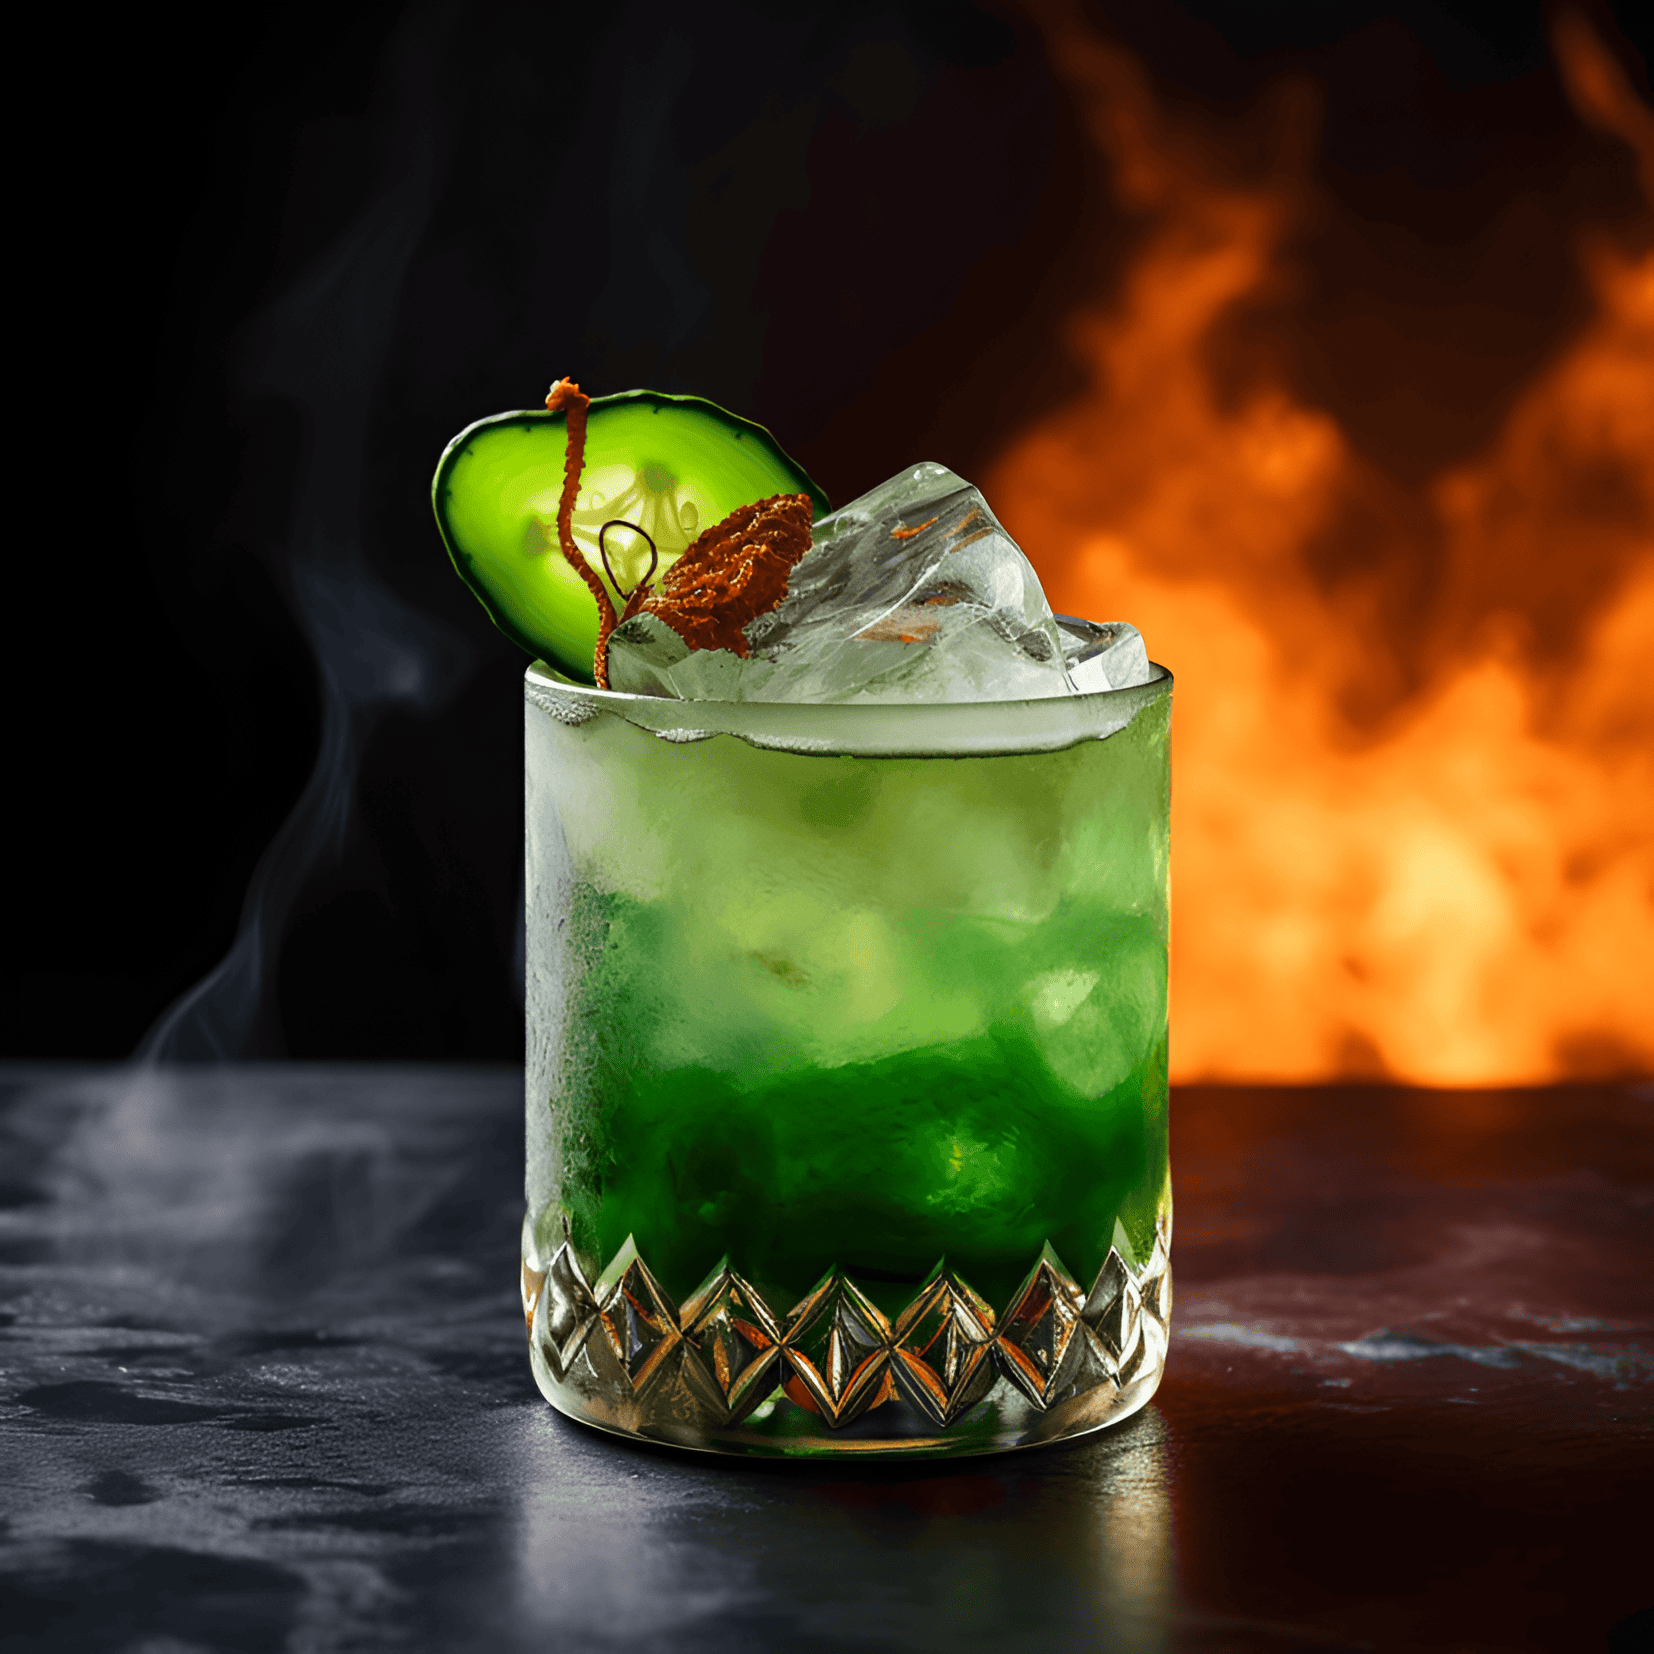 Under the Volcano Cocktail Recipe - The Under the Volcano cocktail offers a complex and intriguing taste profile, with smoky mezcal, sweet agave nectar, and tangy lime juice. The cocktail is well-balanced, with a hint of spice from the jalapeño.